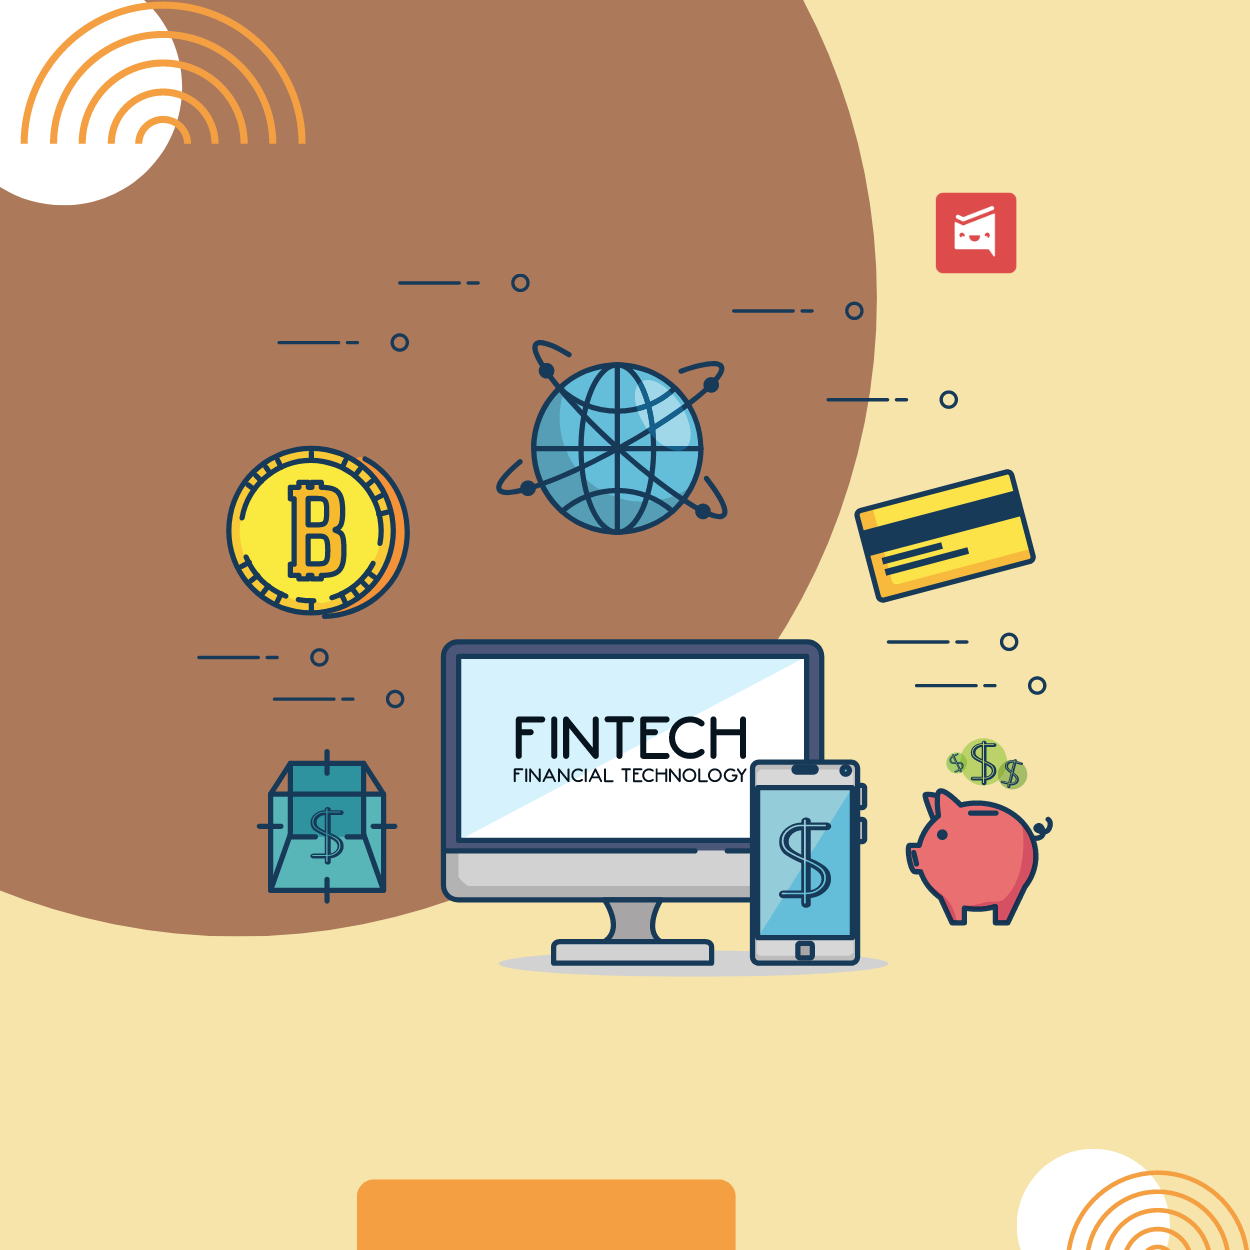 Why Should Small Businesses Utilize Fintech Tools?